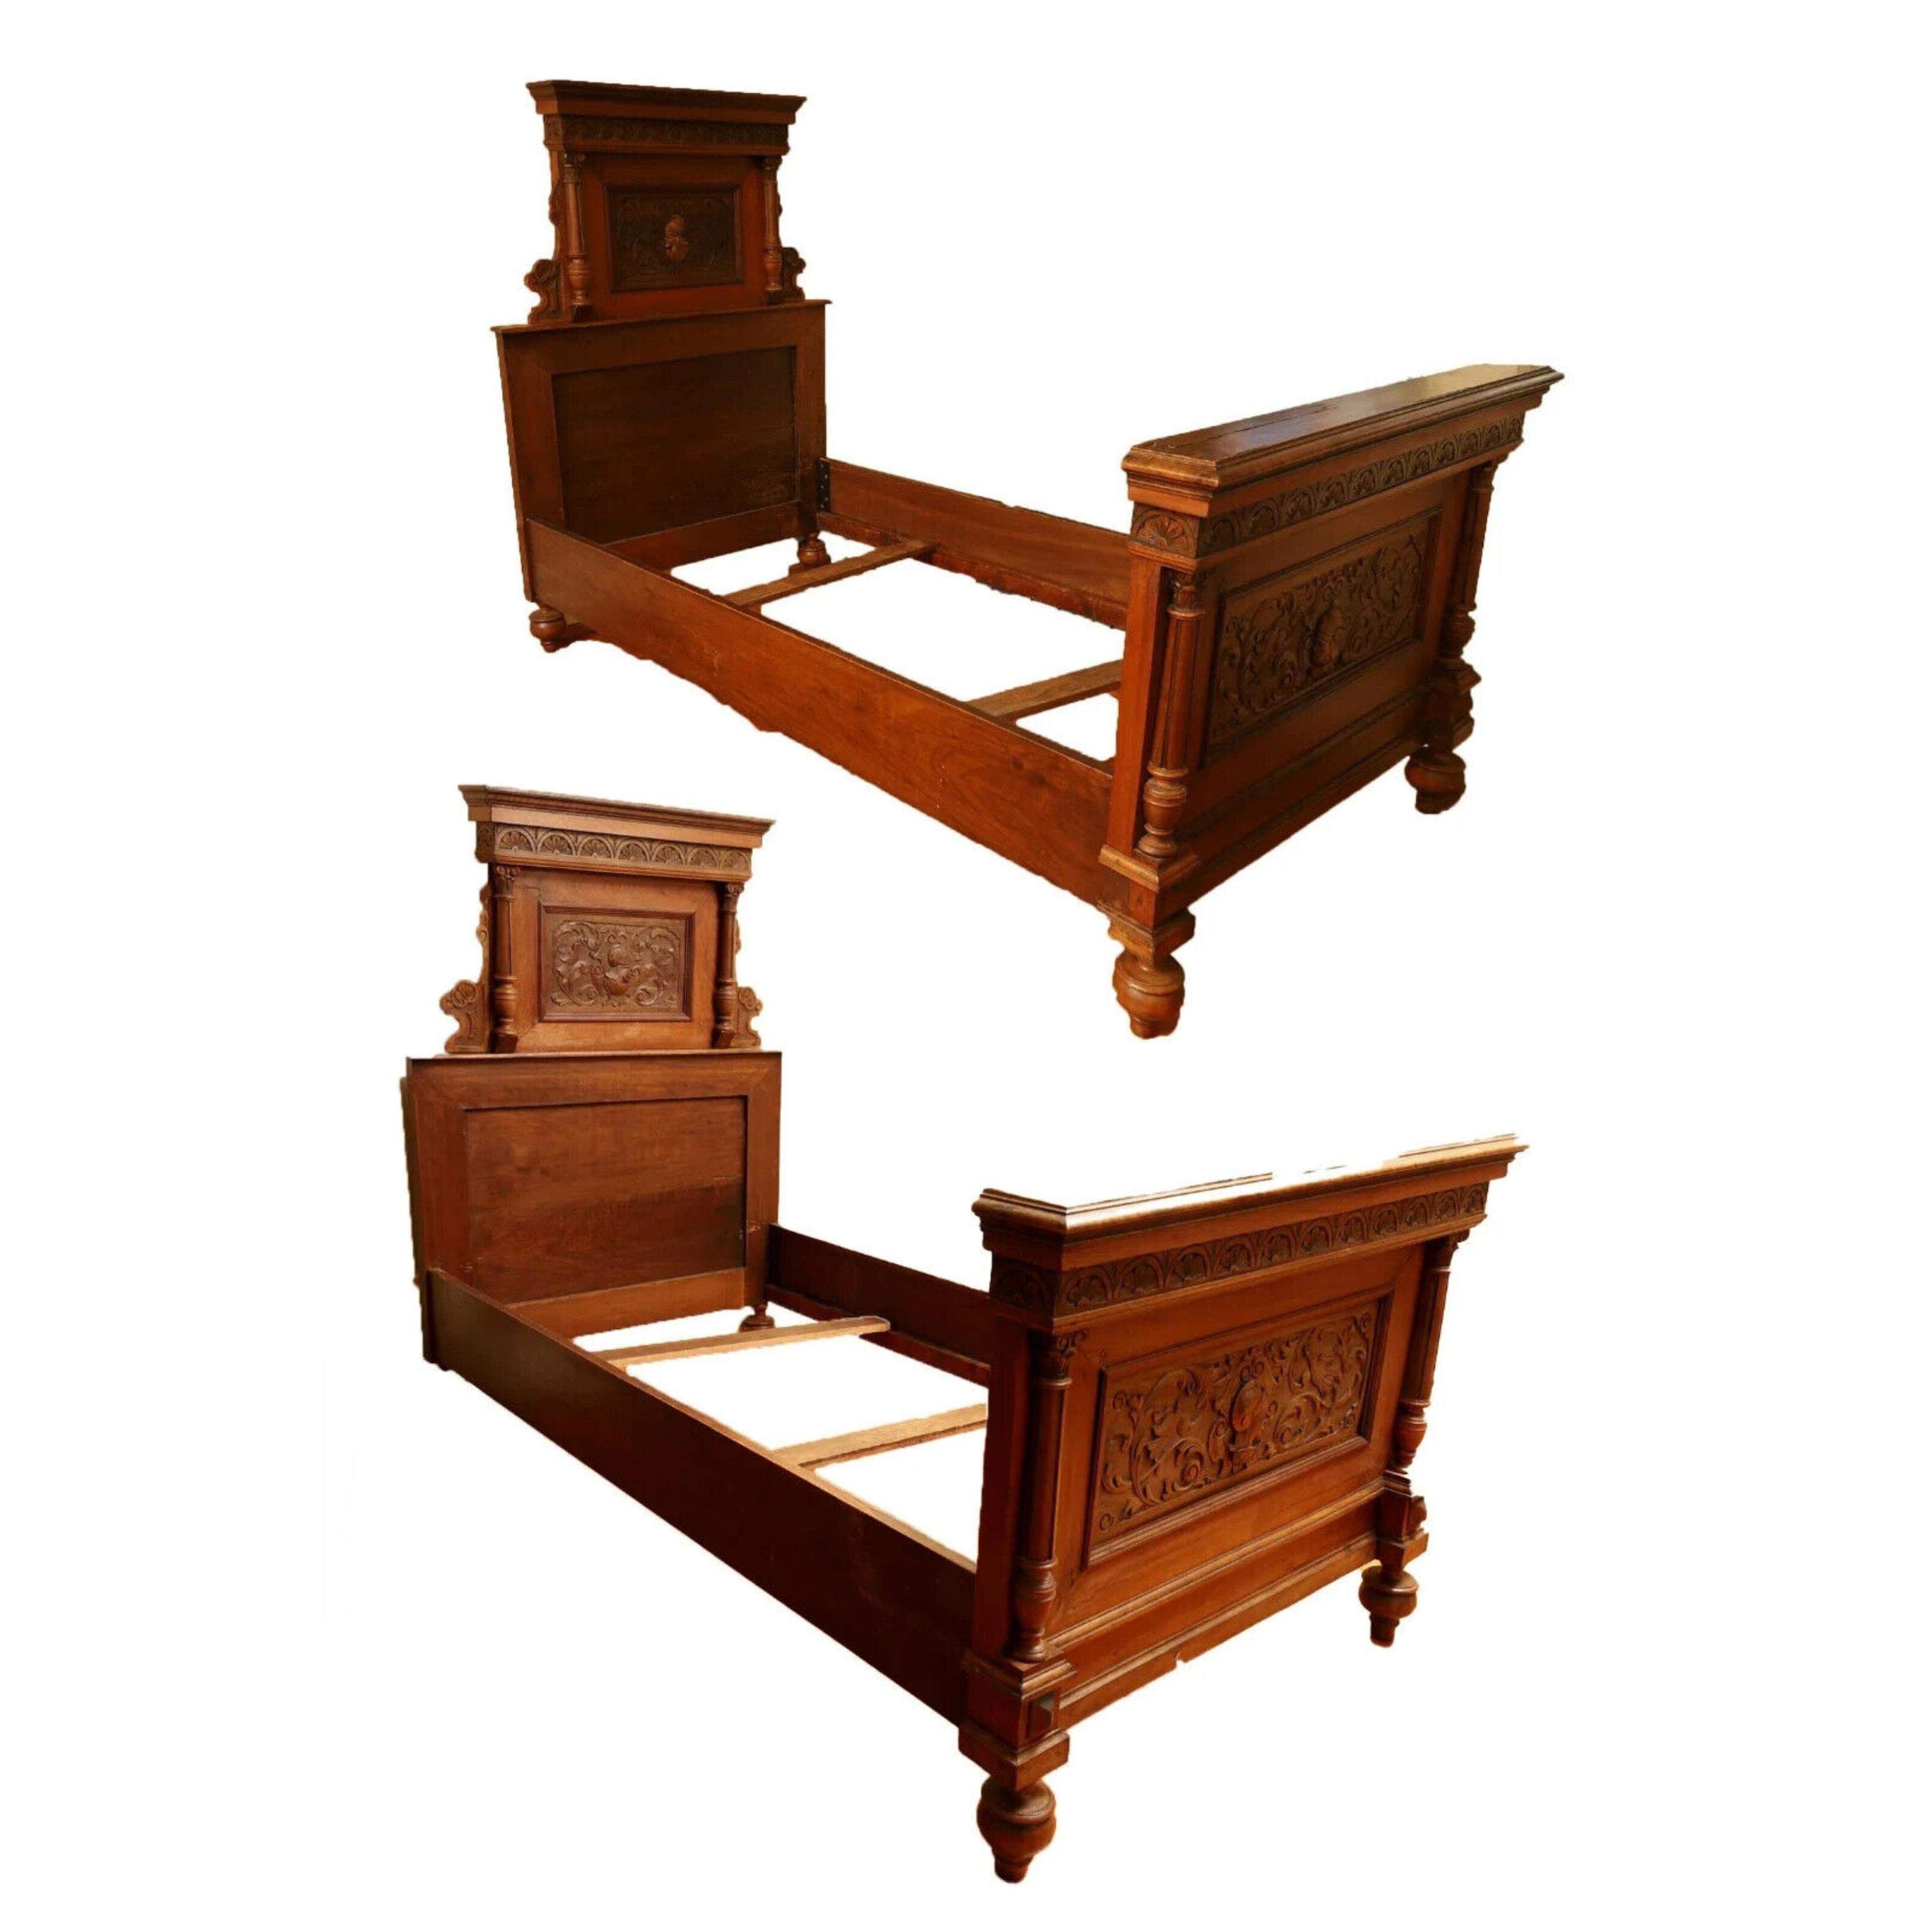 Handsome 1800's Antique  Austrian Carved Walnut, Pair, with Rails, Twin Beds,  Set of Two!!

Austrian Carved Walnut  Beds (2), 19th Century, 1 Pair Having 2  beds with head and footboards and rails H 57